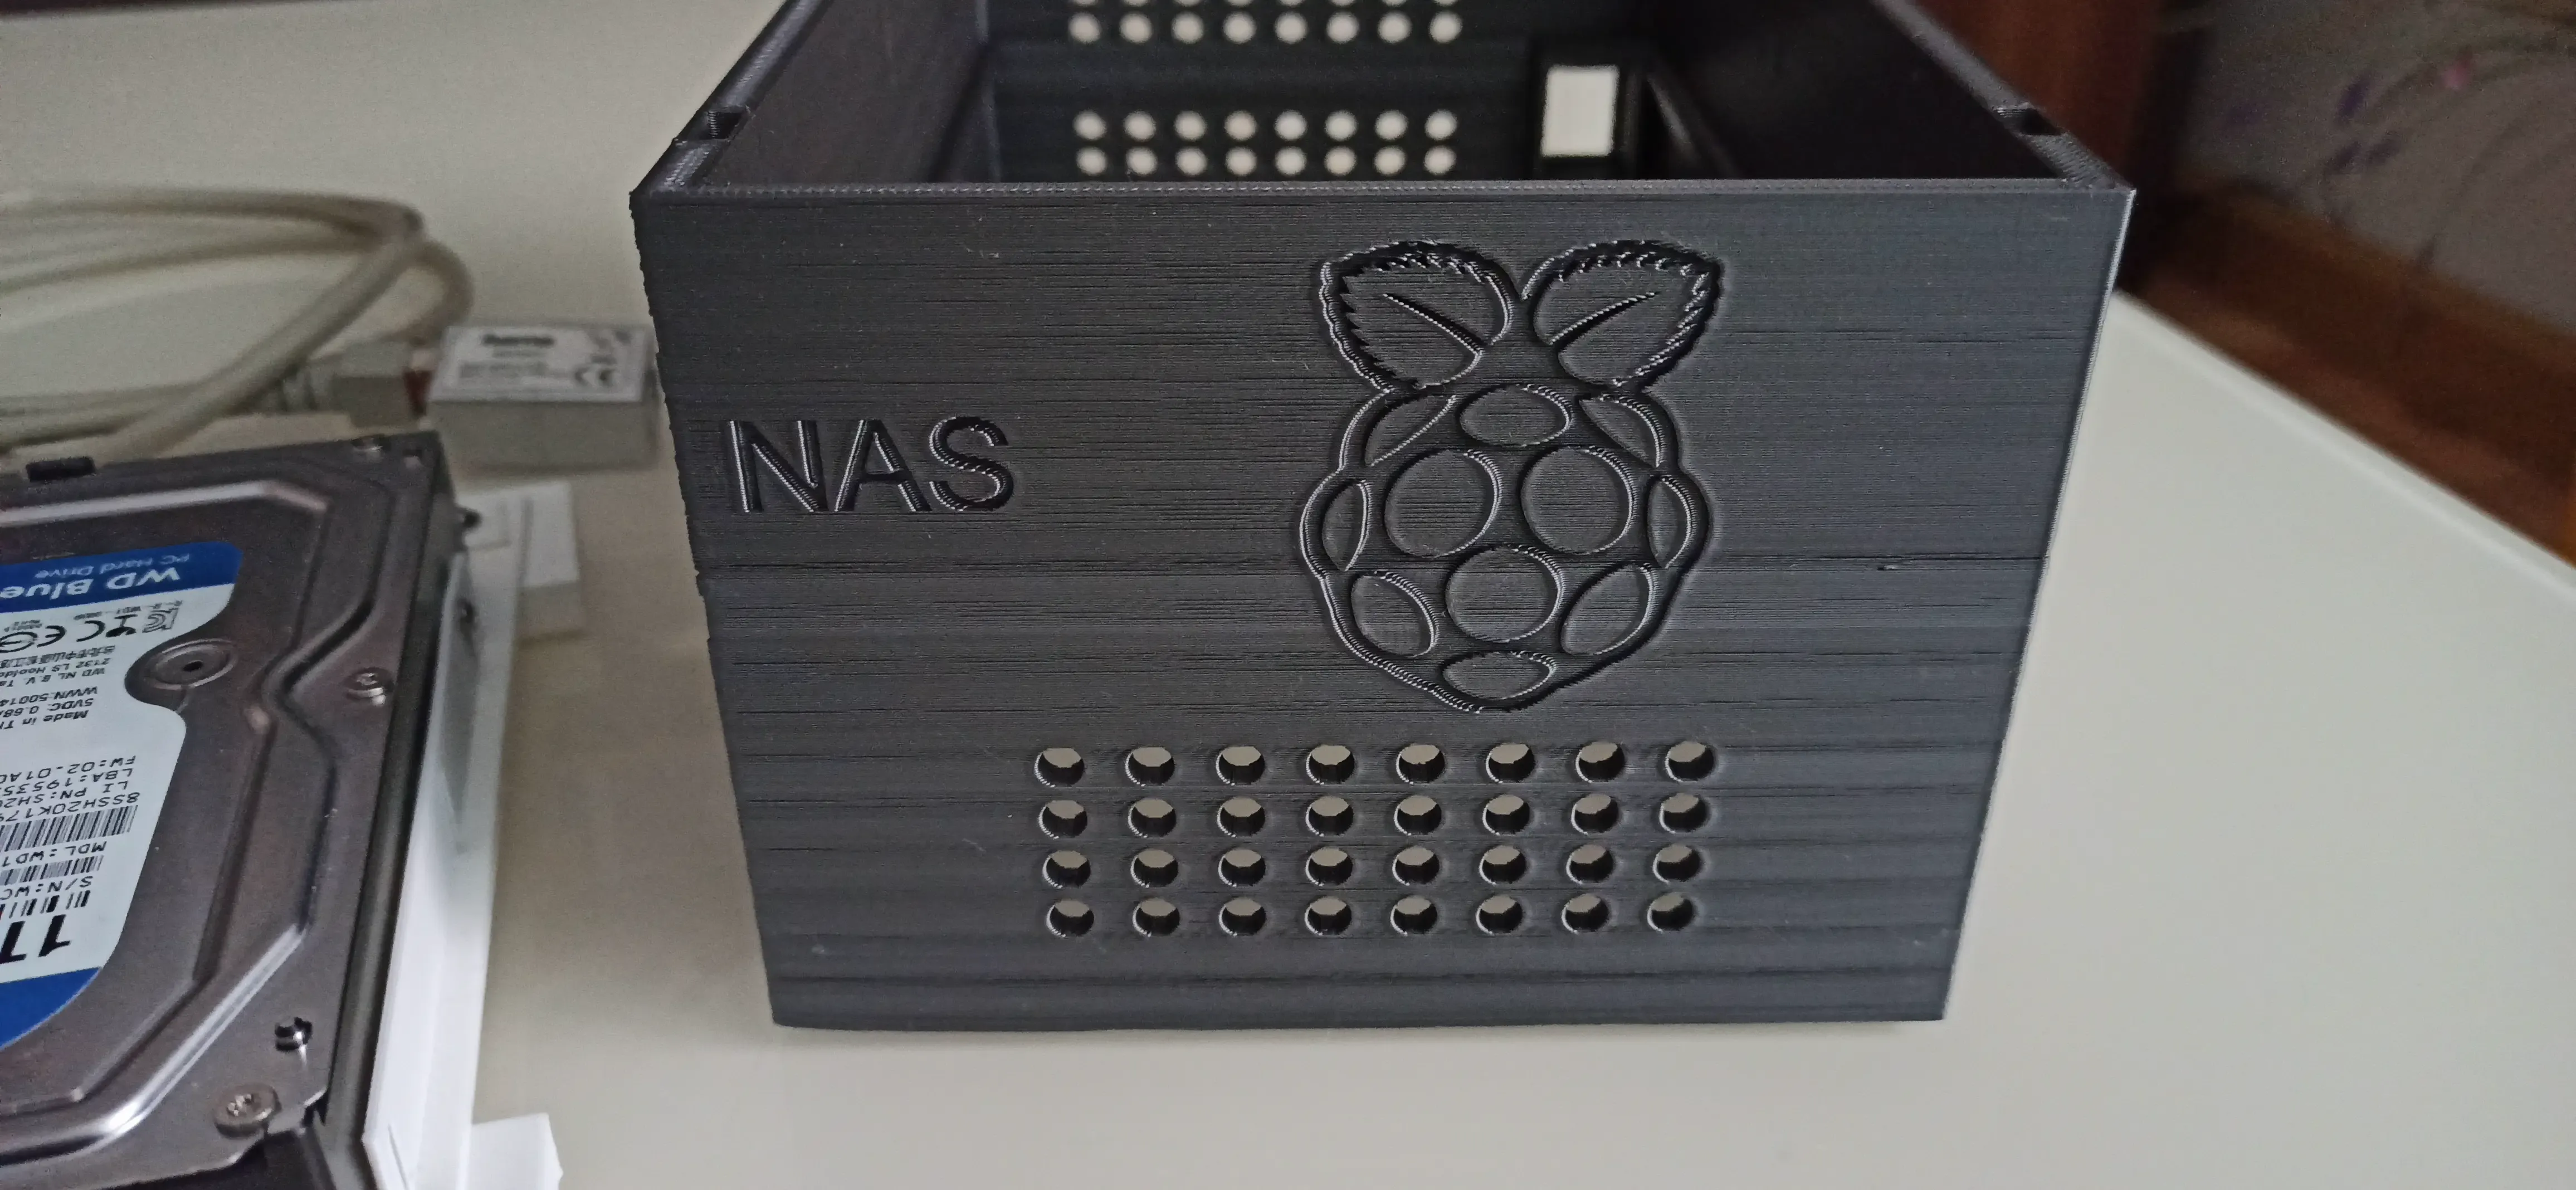 Rasperry Pi 4 + HDD als NAS mit OpenMediaVault by PerryDesig